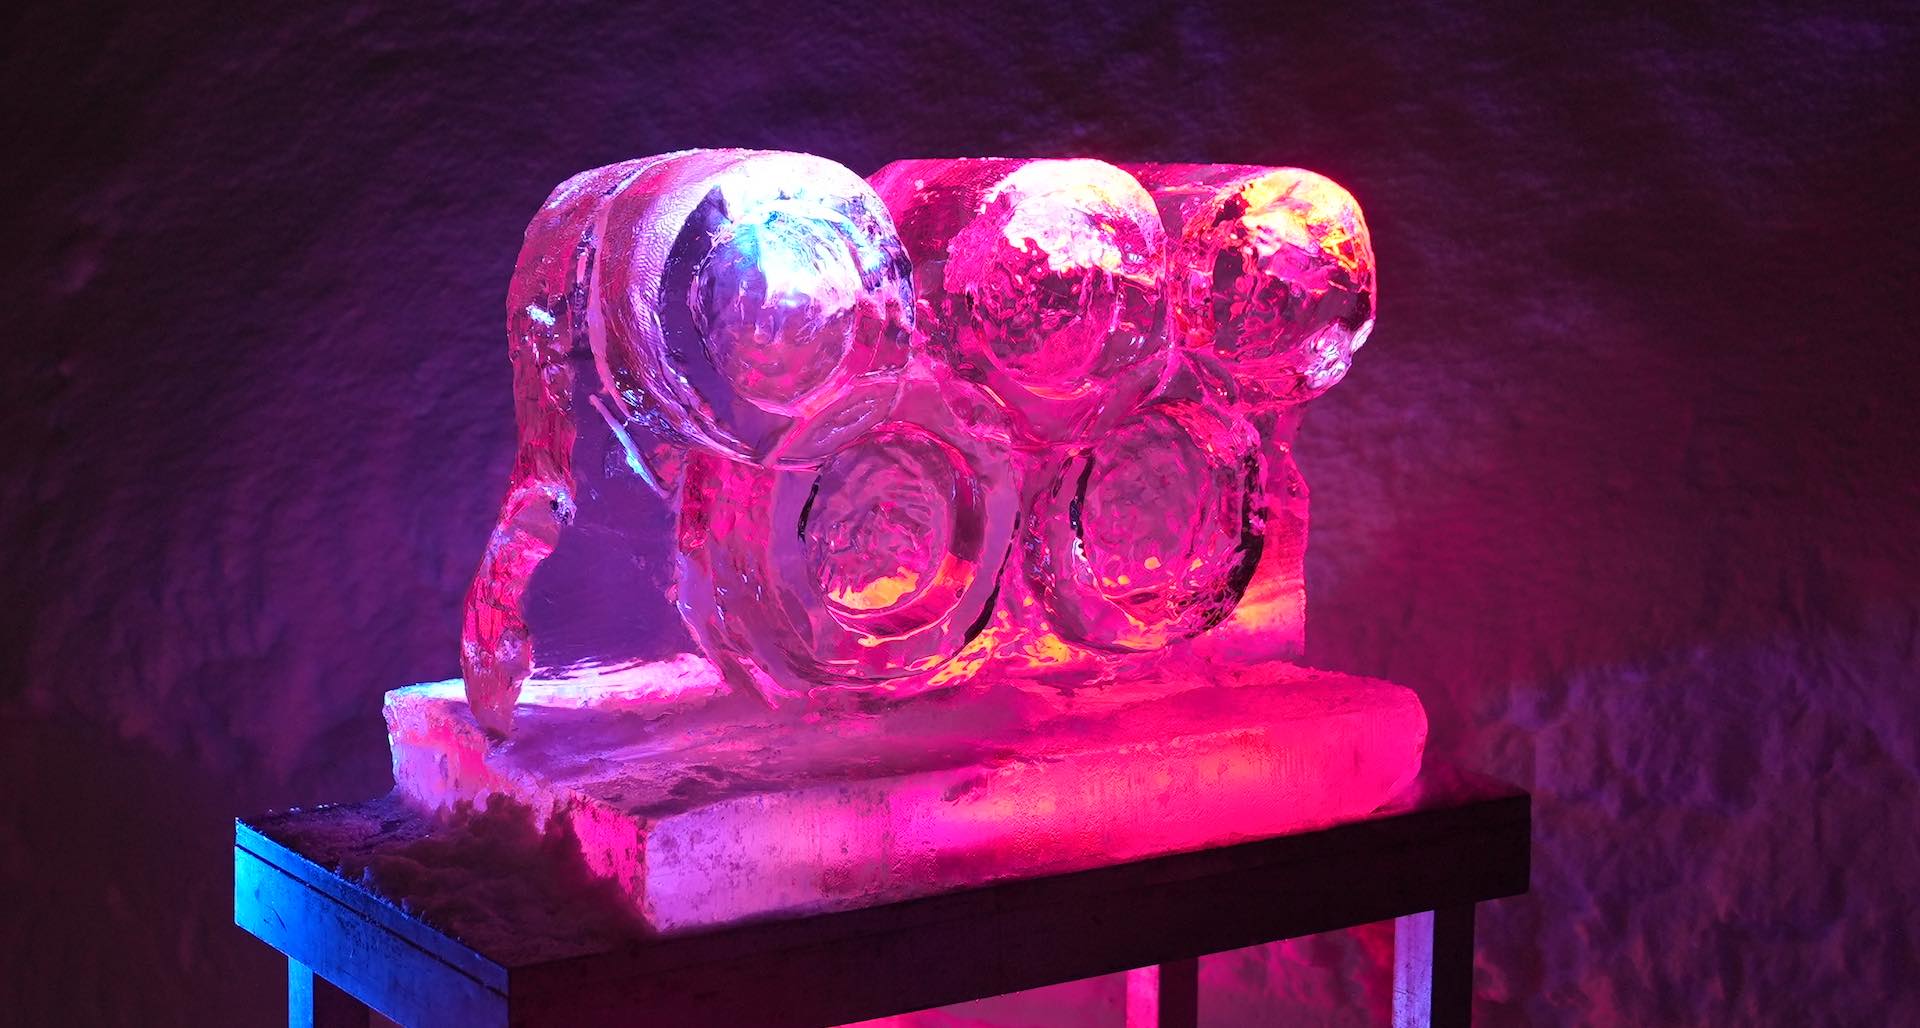 ICE CARVING PICTURE